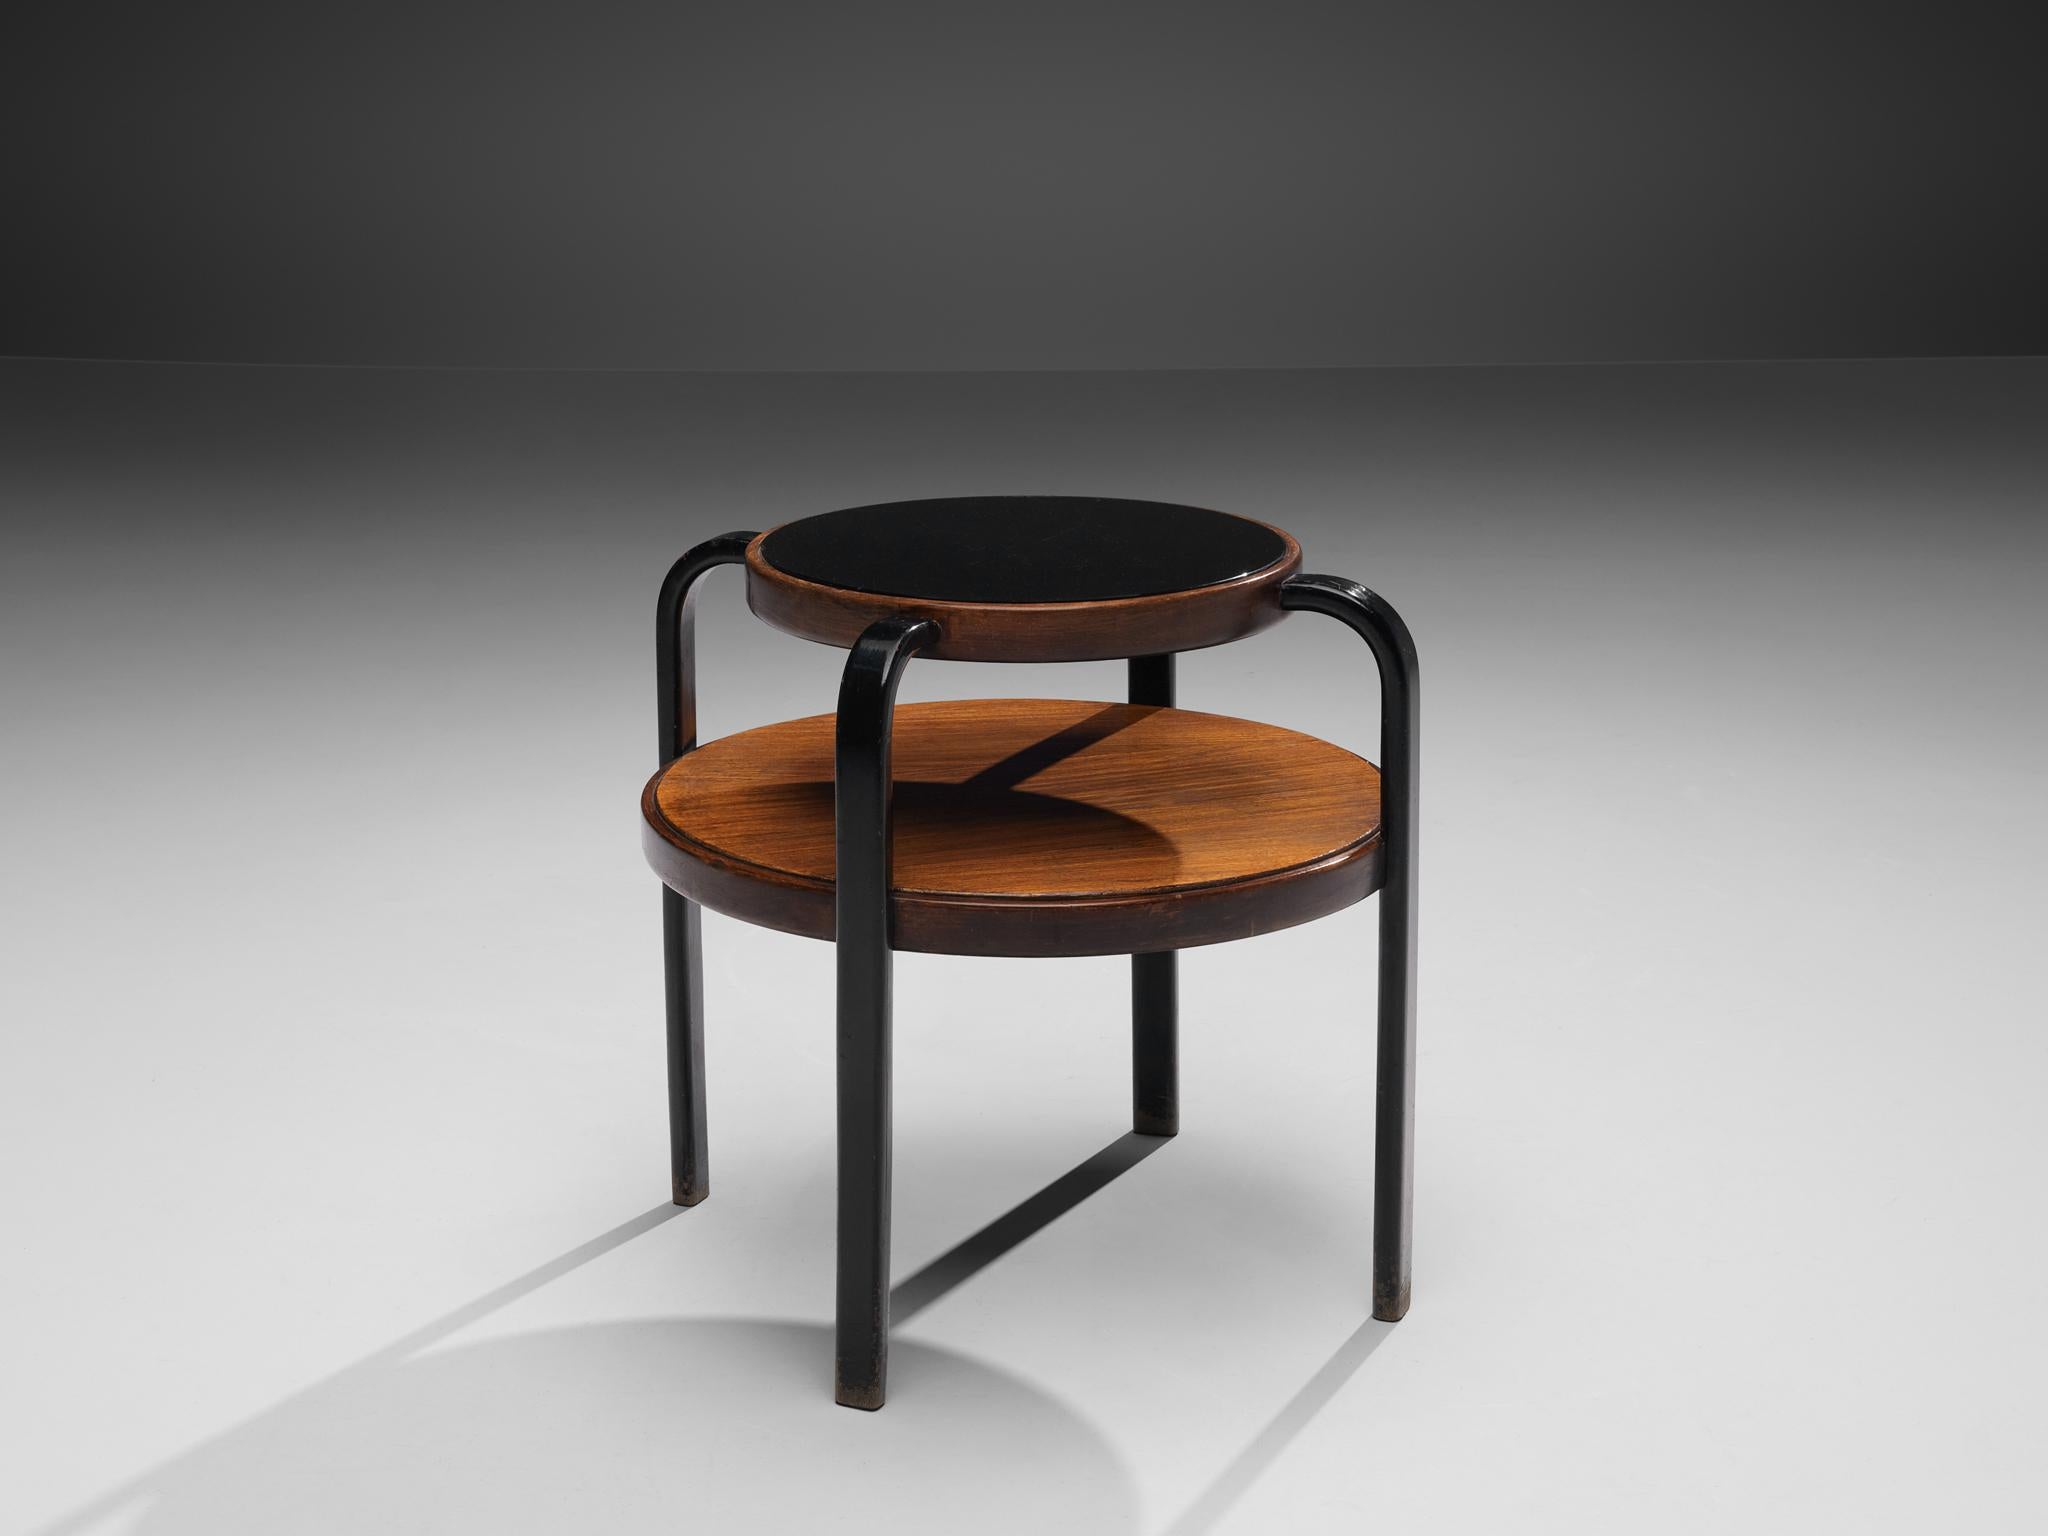 Coffee table, walnut, wood, glass, Italy 1960s

This side table is structured in two levels by means of two round tops varying in size. Four black curved legs run upwards, holding the big tray at the sides and the smaller tray with a black colored